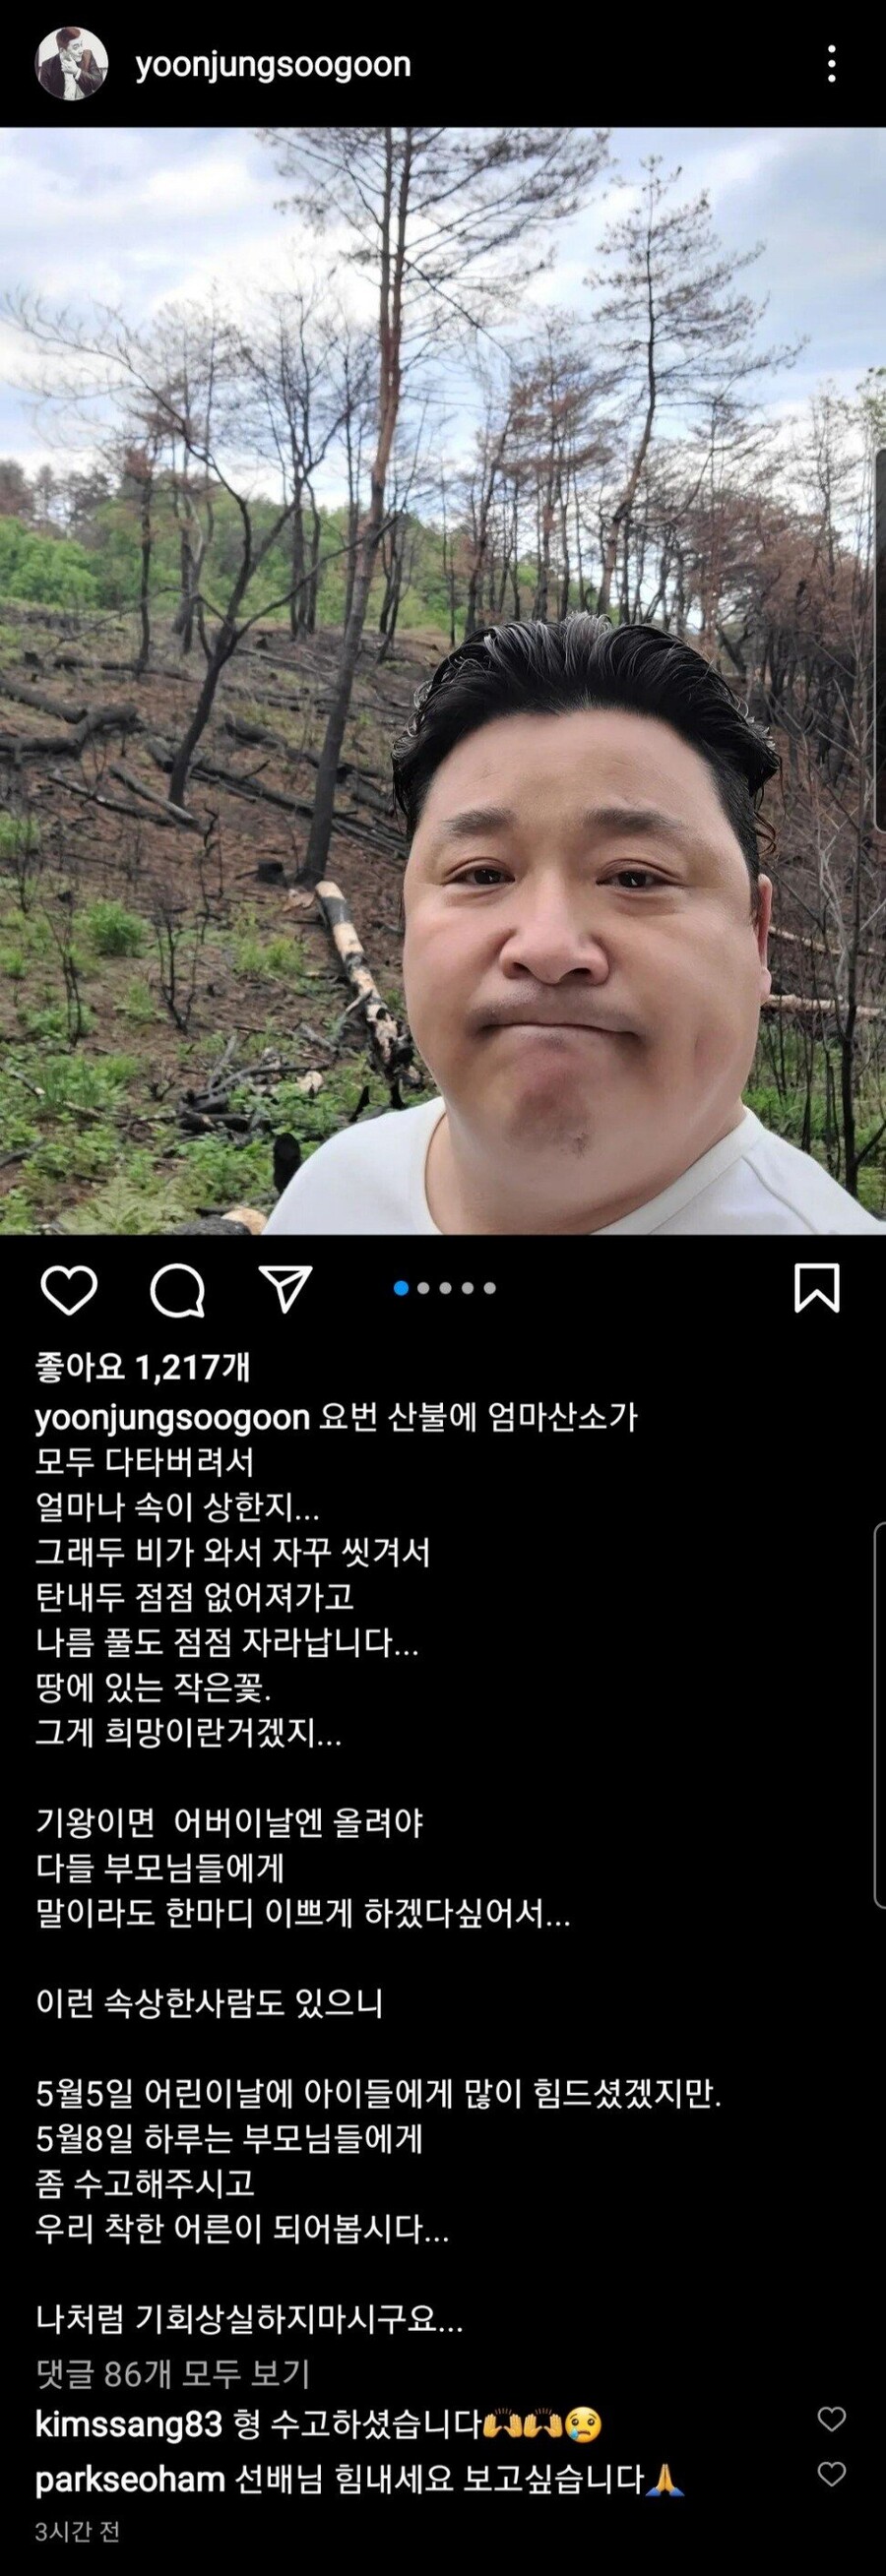 Yoon Jeong-soo burned his mother's oxygen due to a forest fire